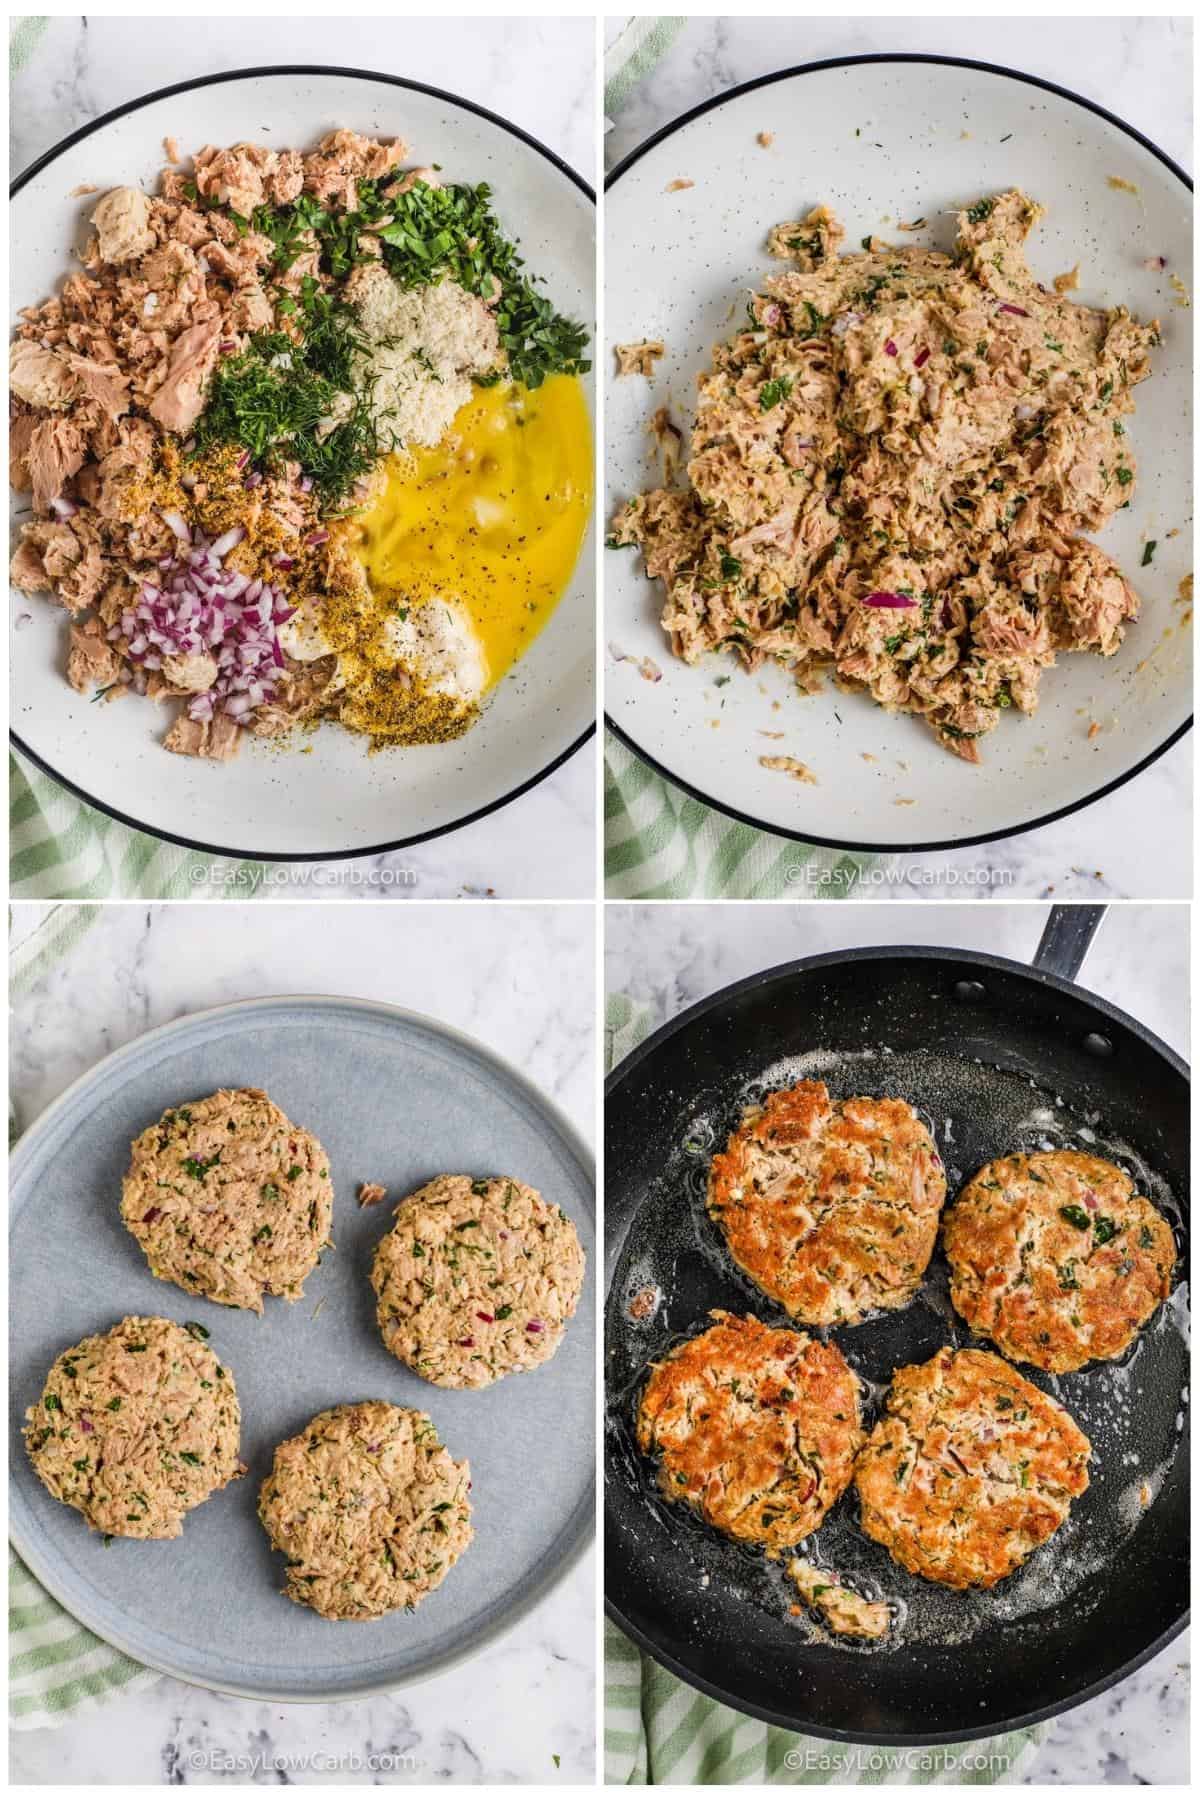 process of adding ingredients together and cooking to make Tuna Cakes